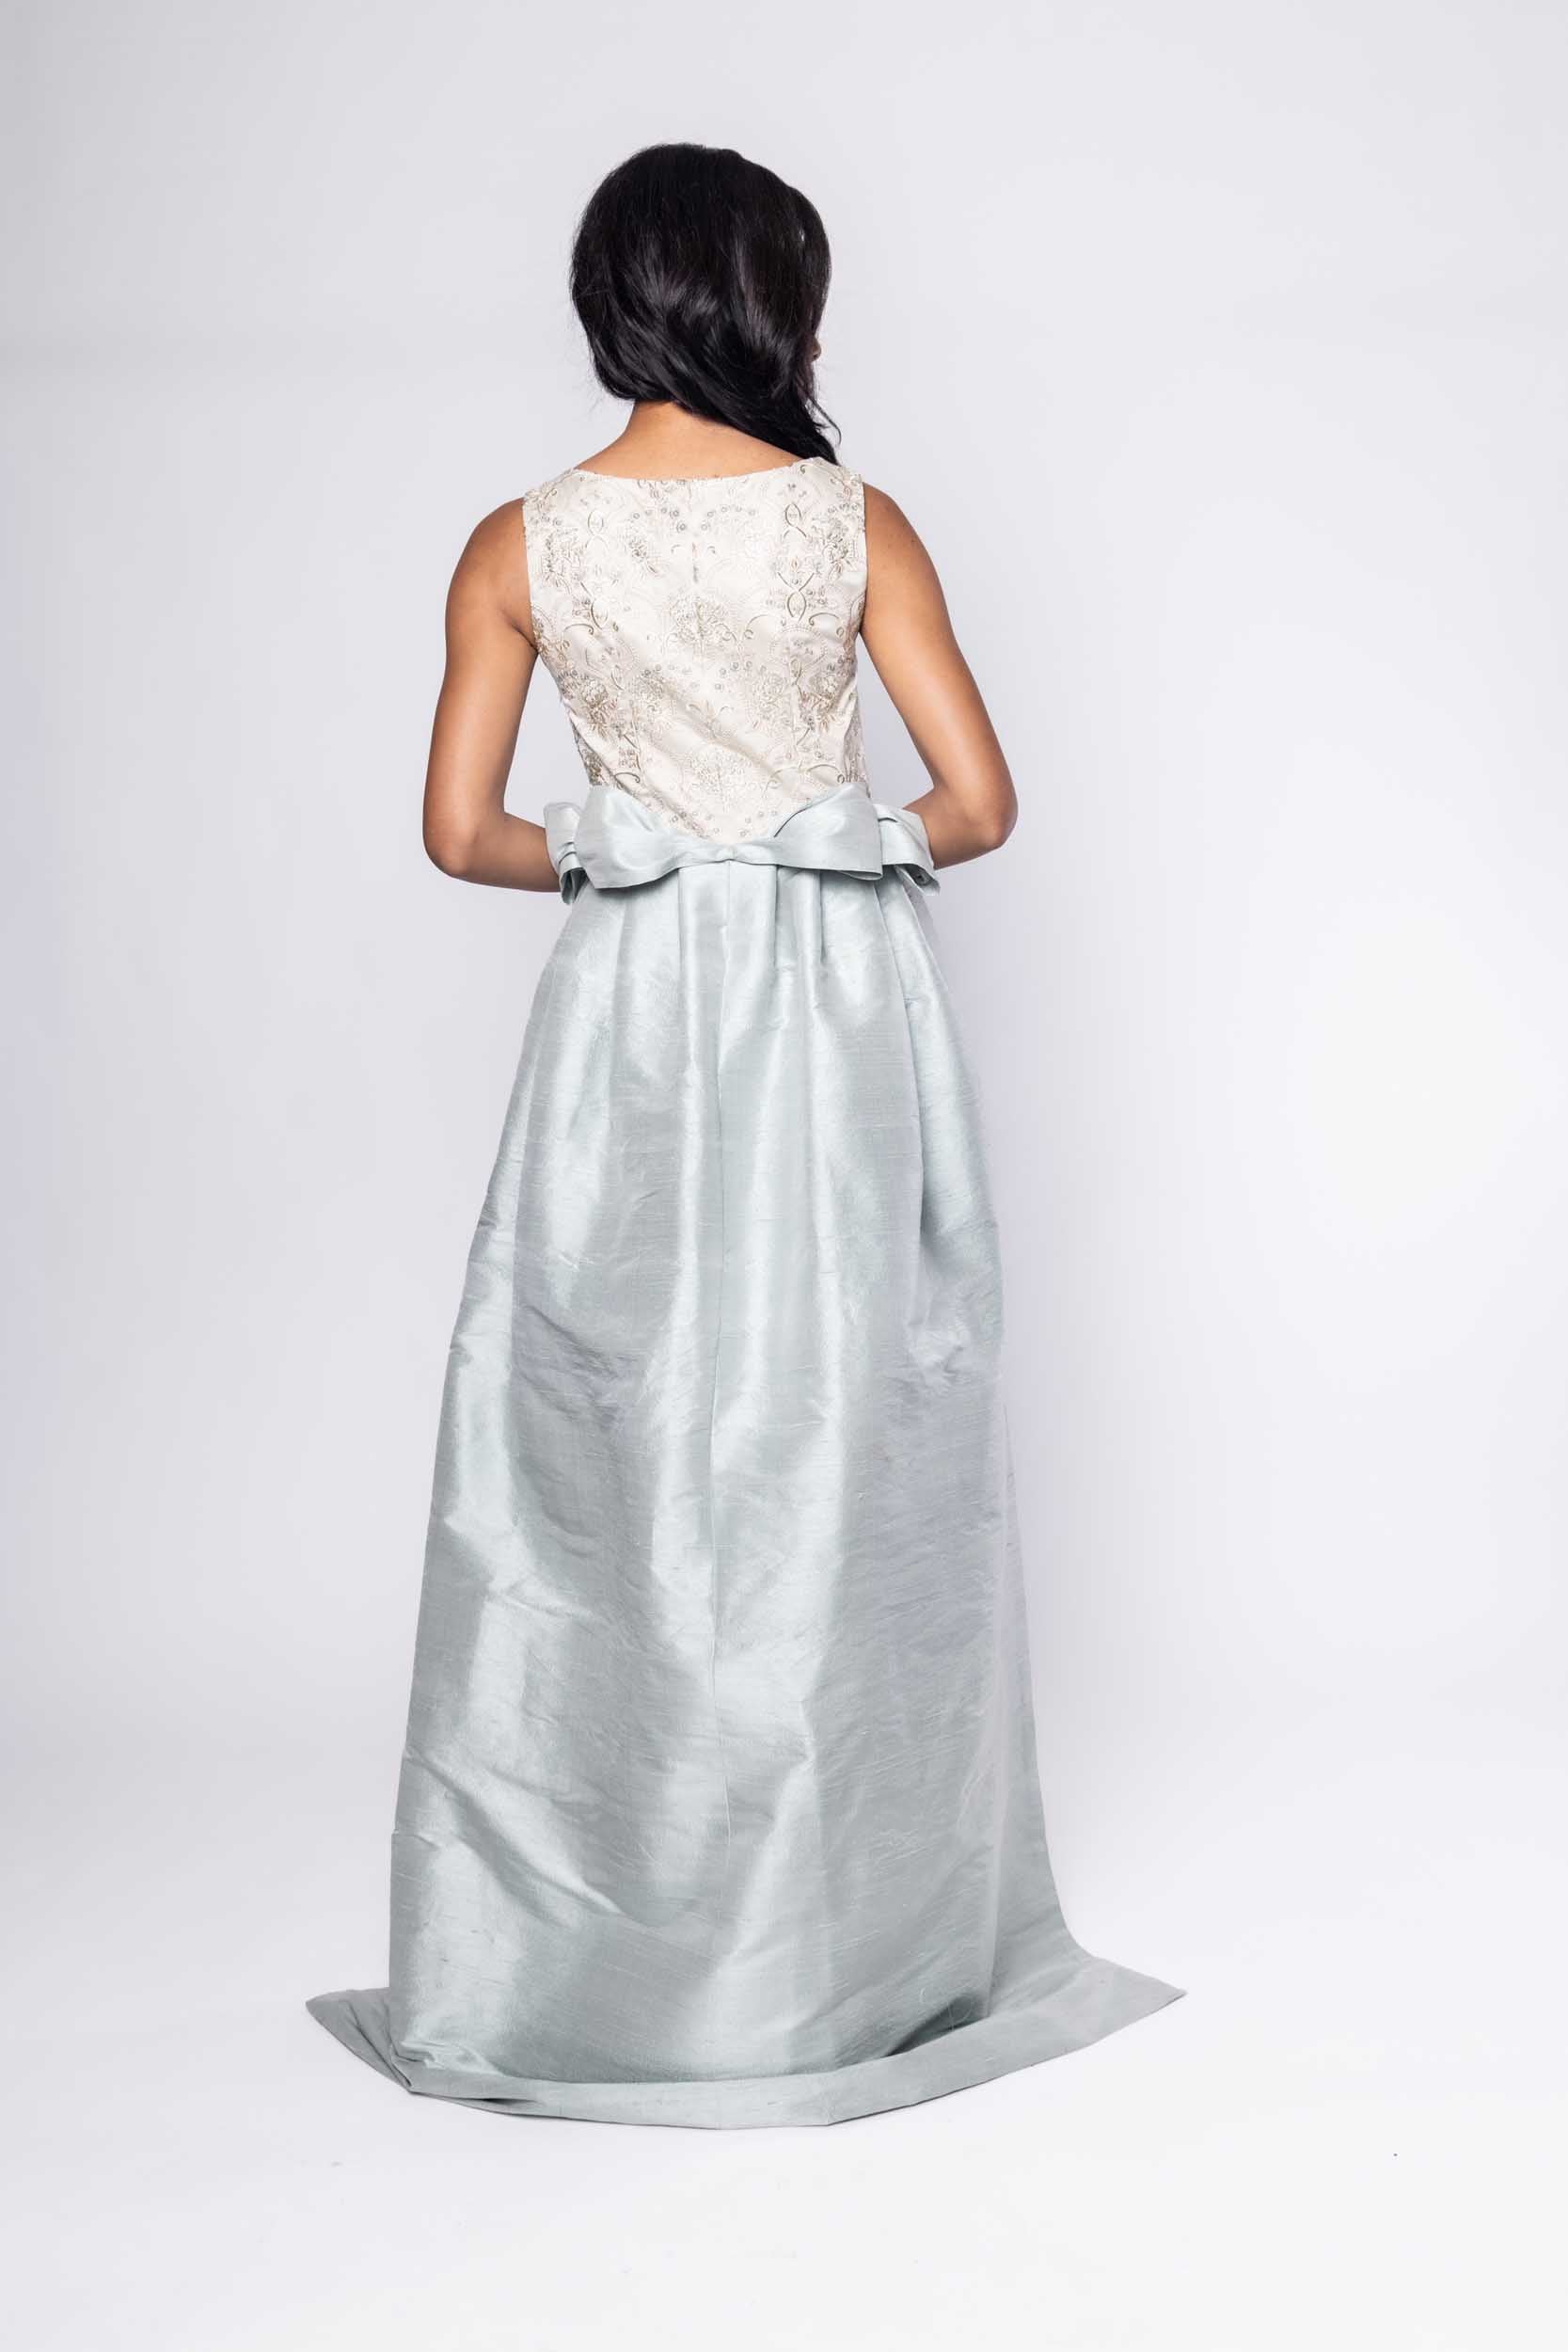 Beautiful model in an embroidered, ornate Sujata Gazder gown with large blue bow train - back view